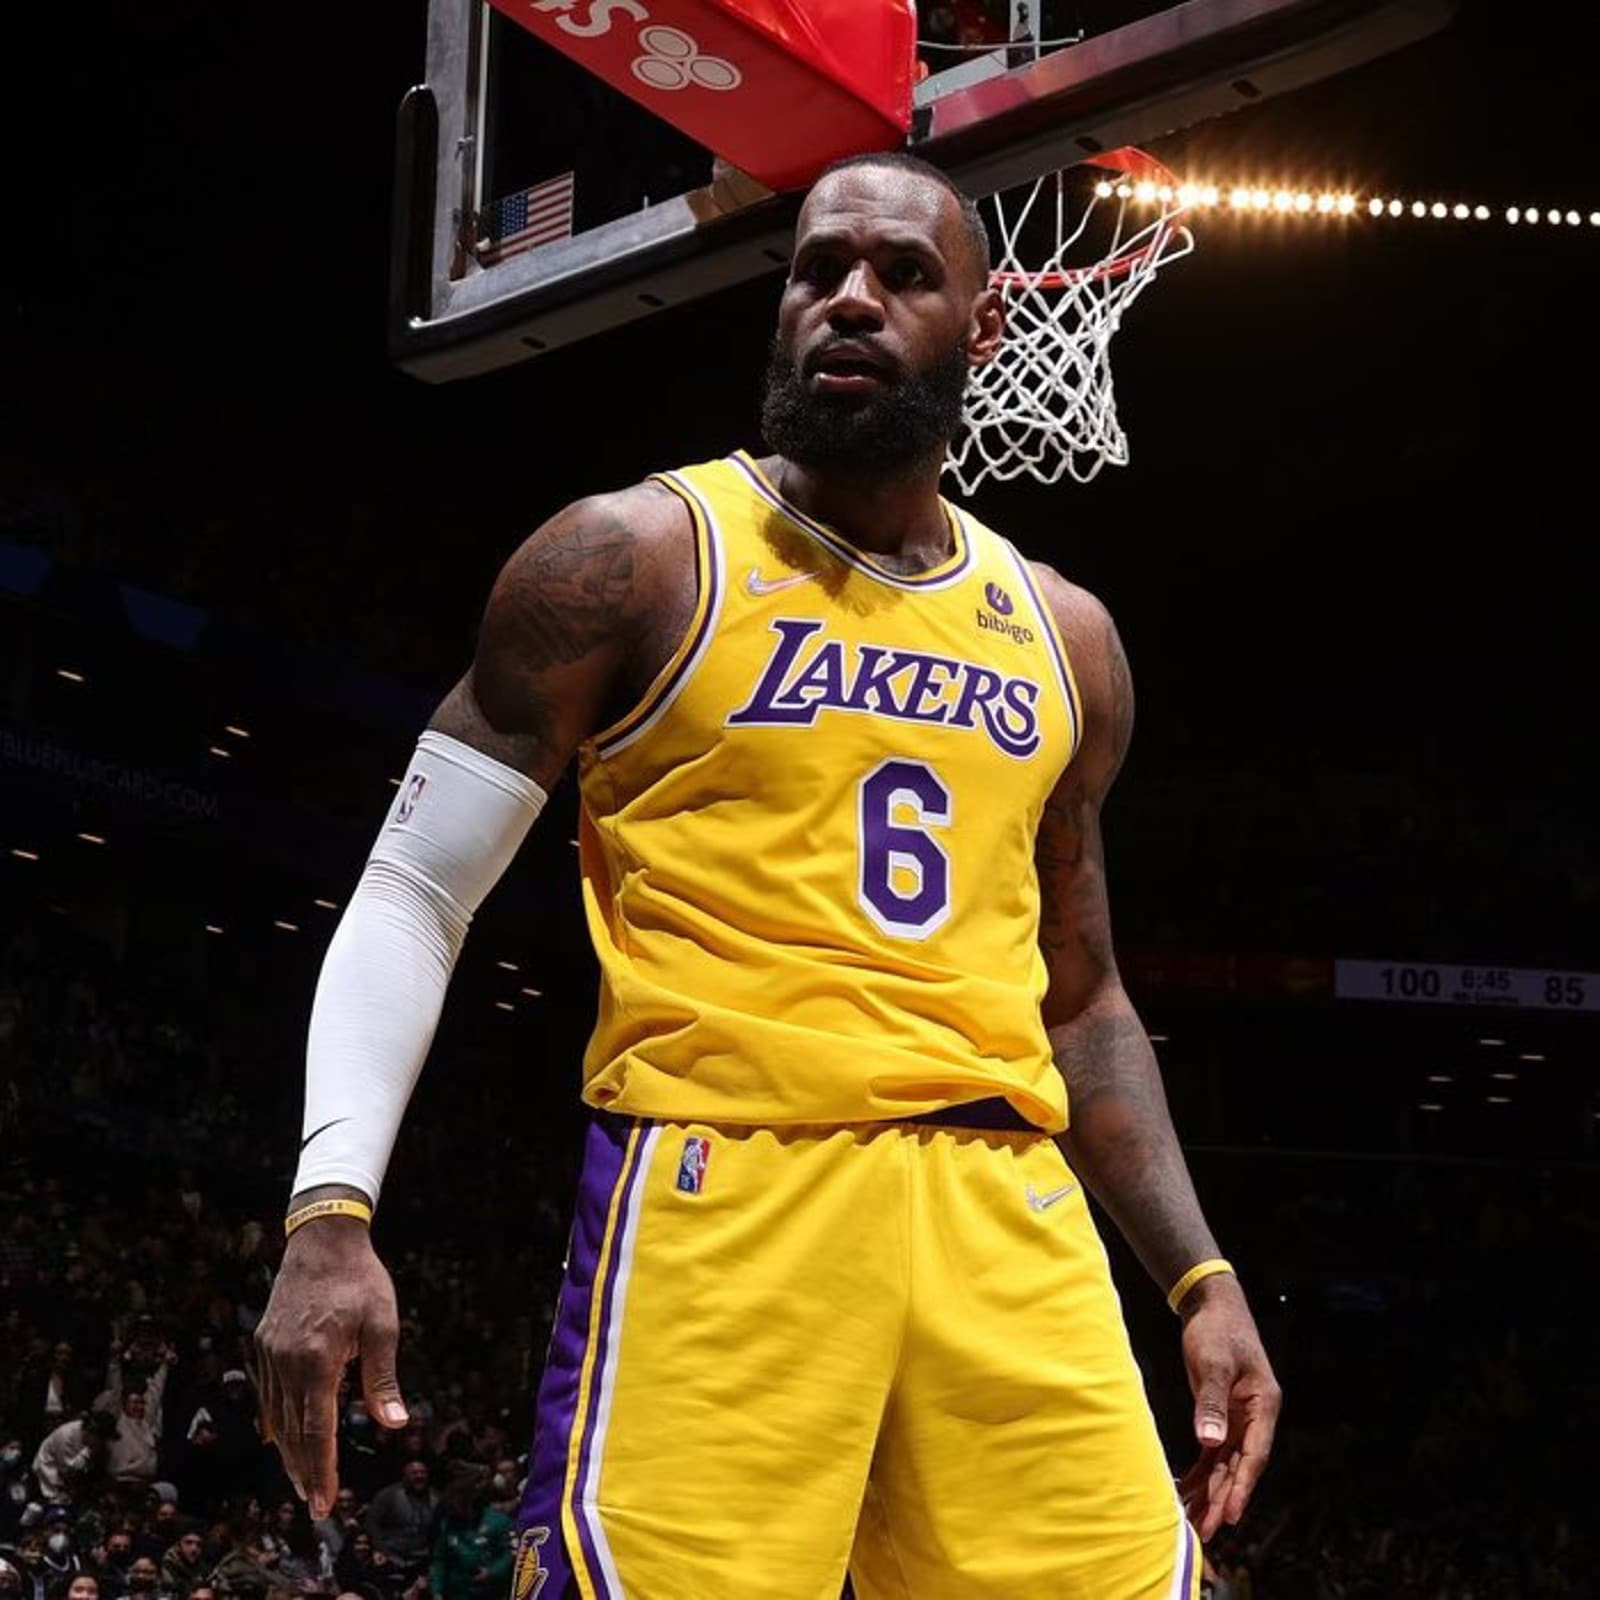 LeBron James breaks records and then loses games: It's a tradition